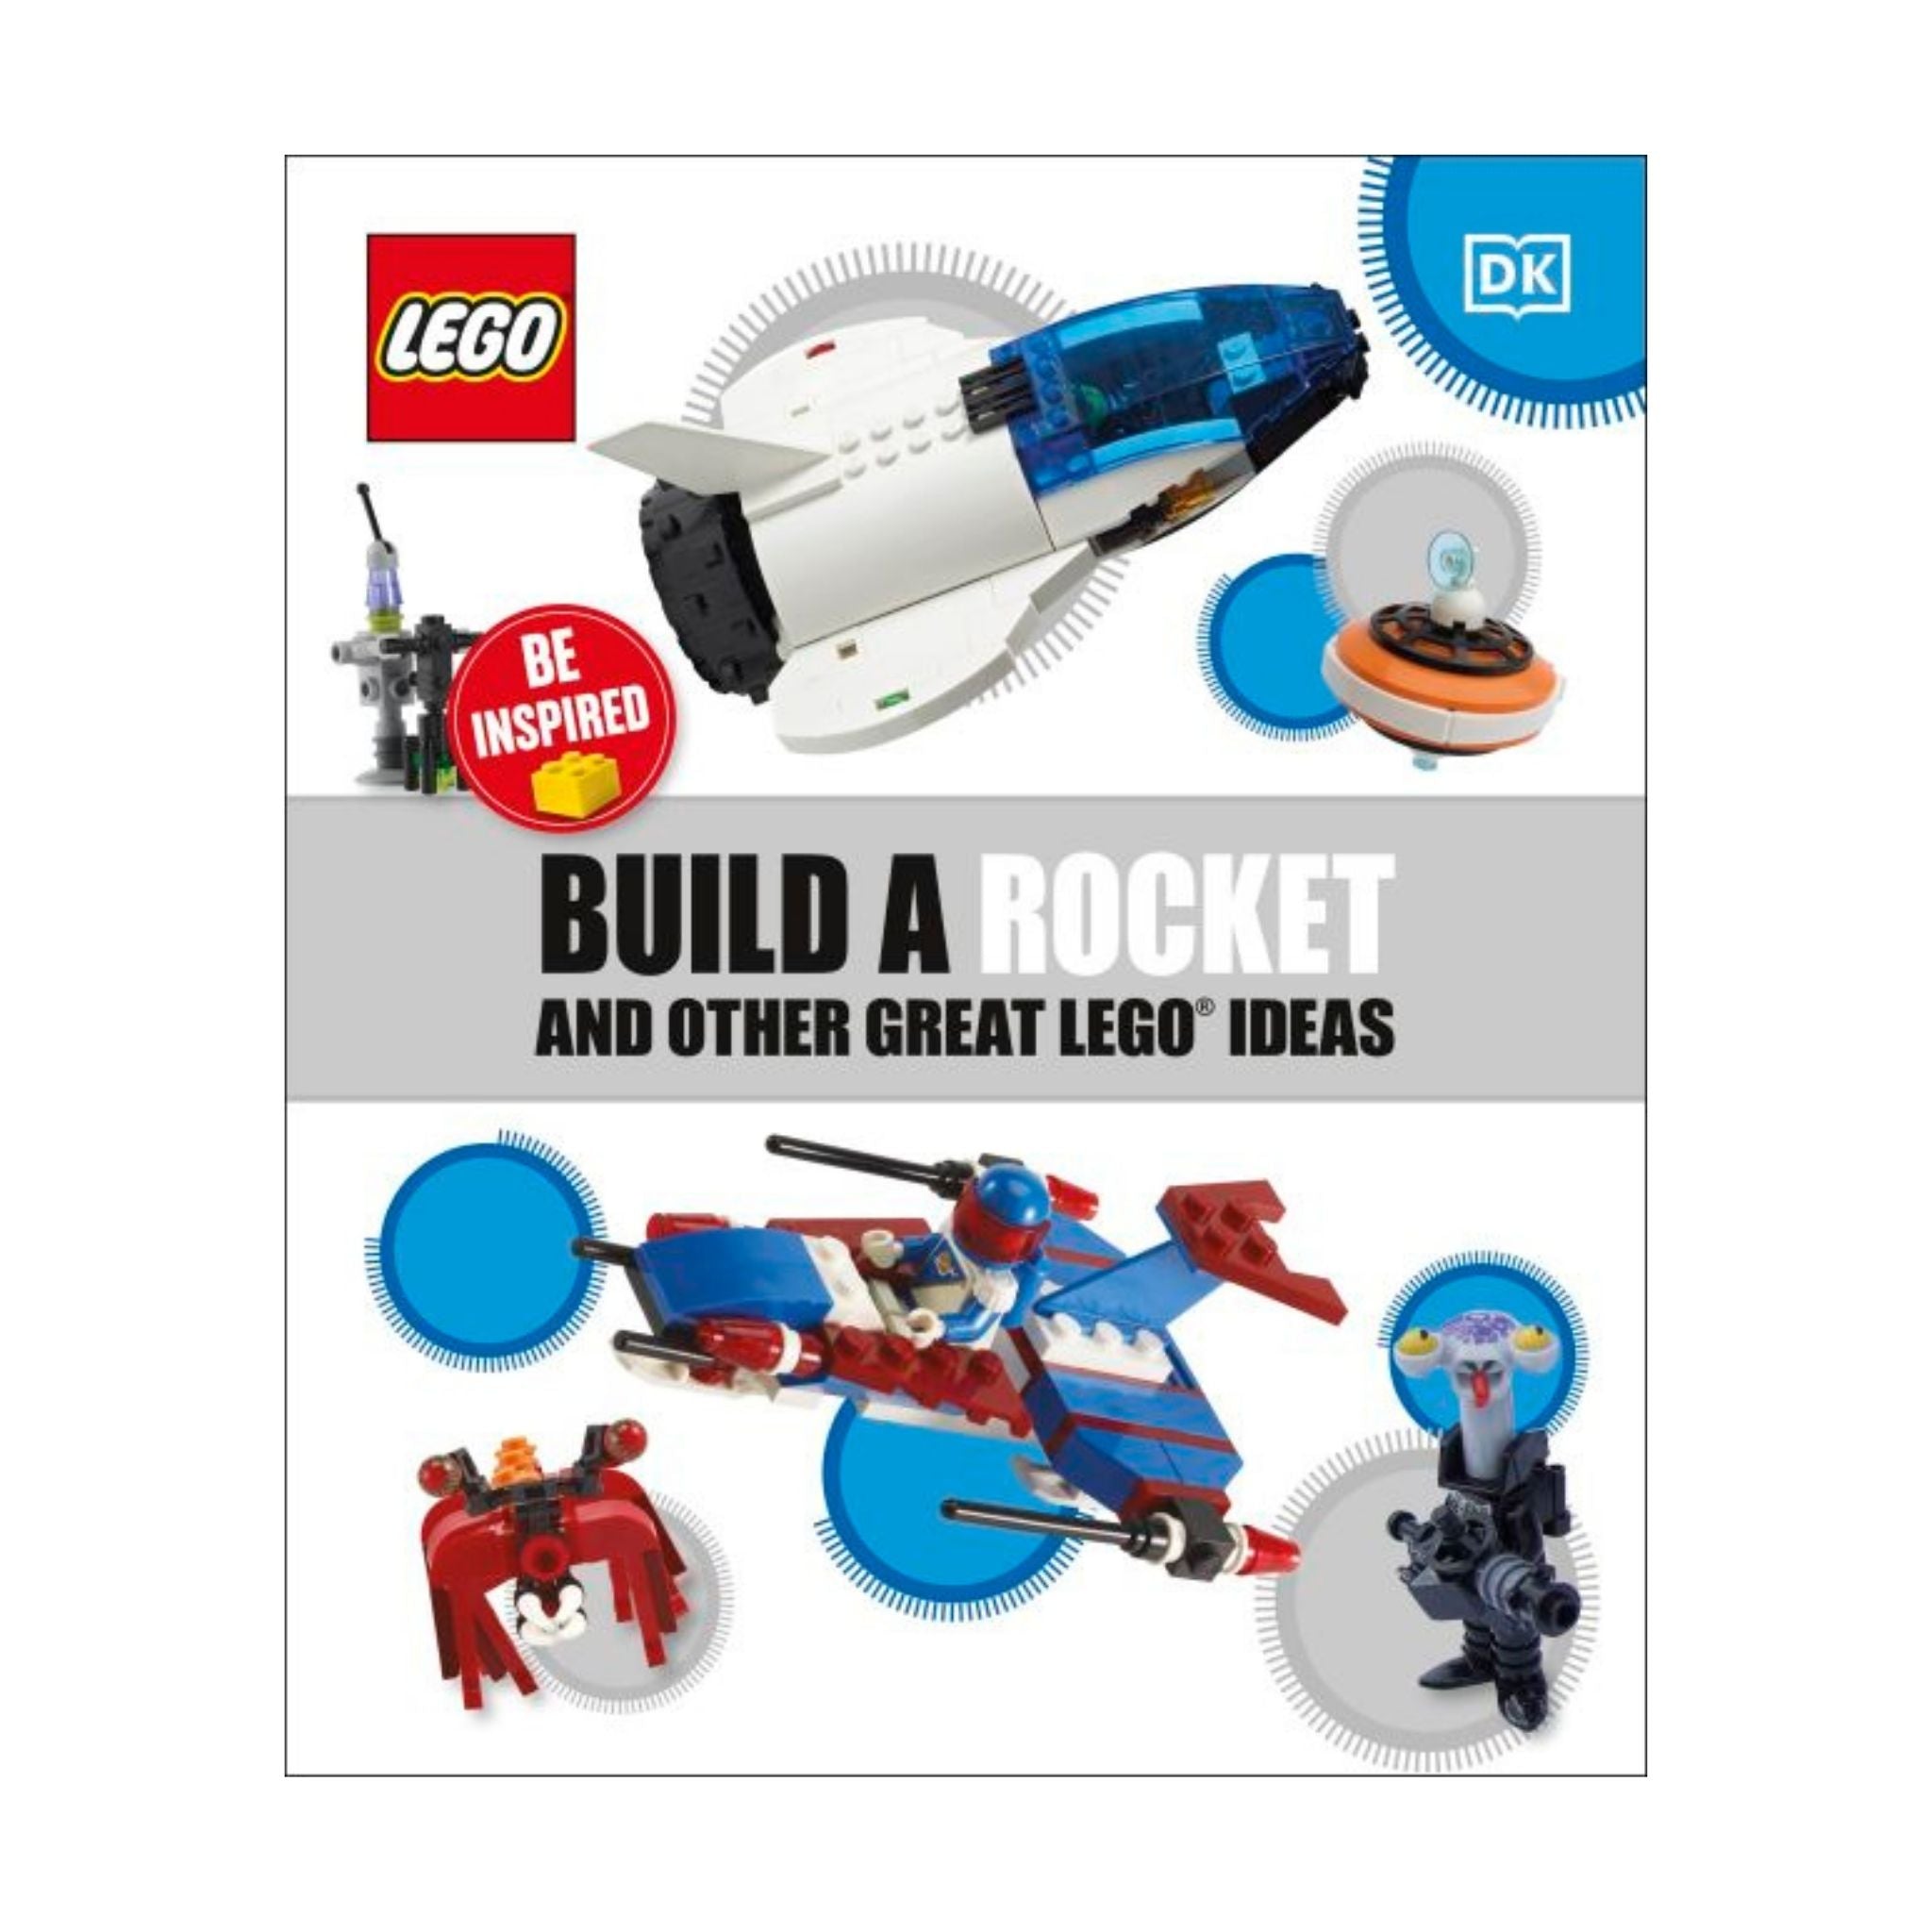 Build a Rocket and Other Great LEGO Ideas